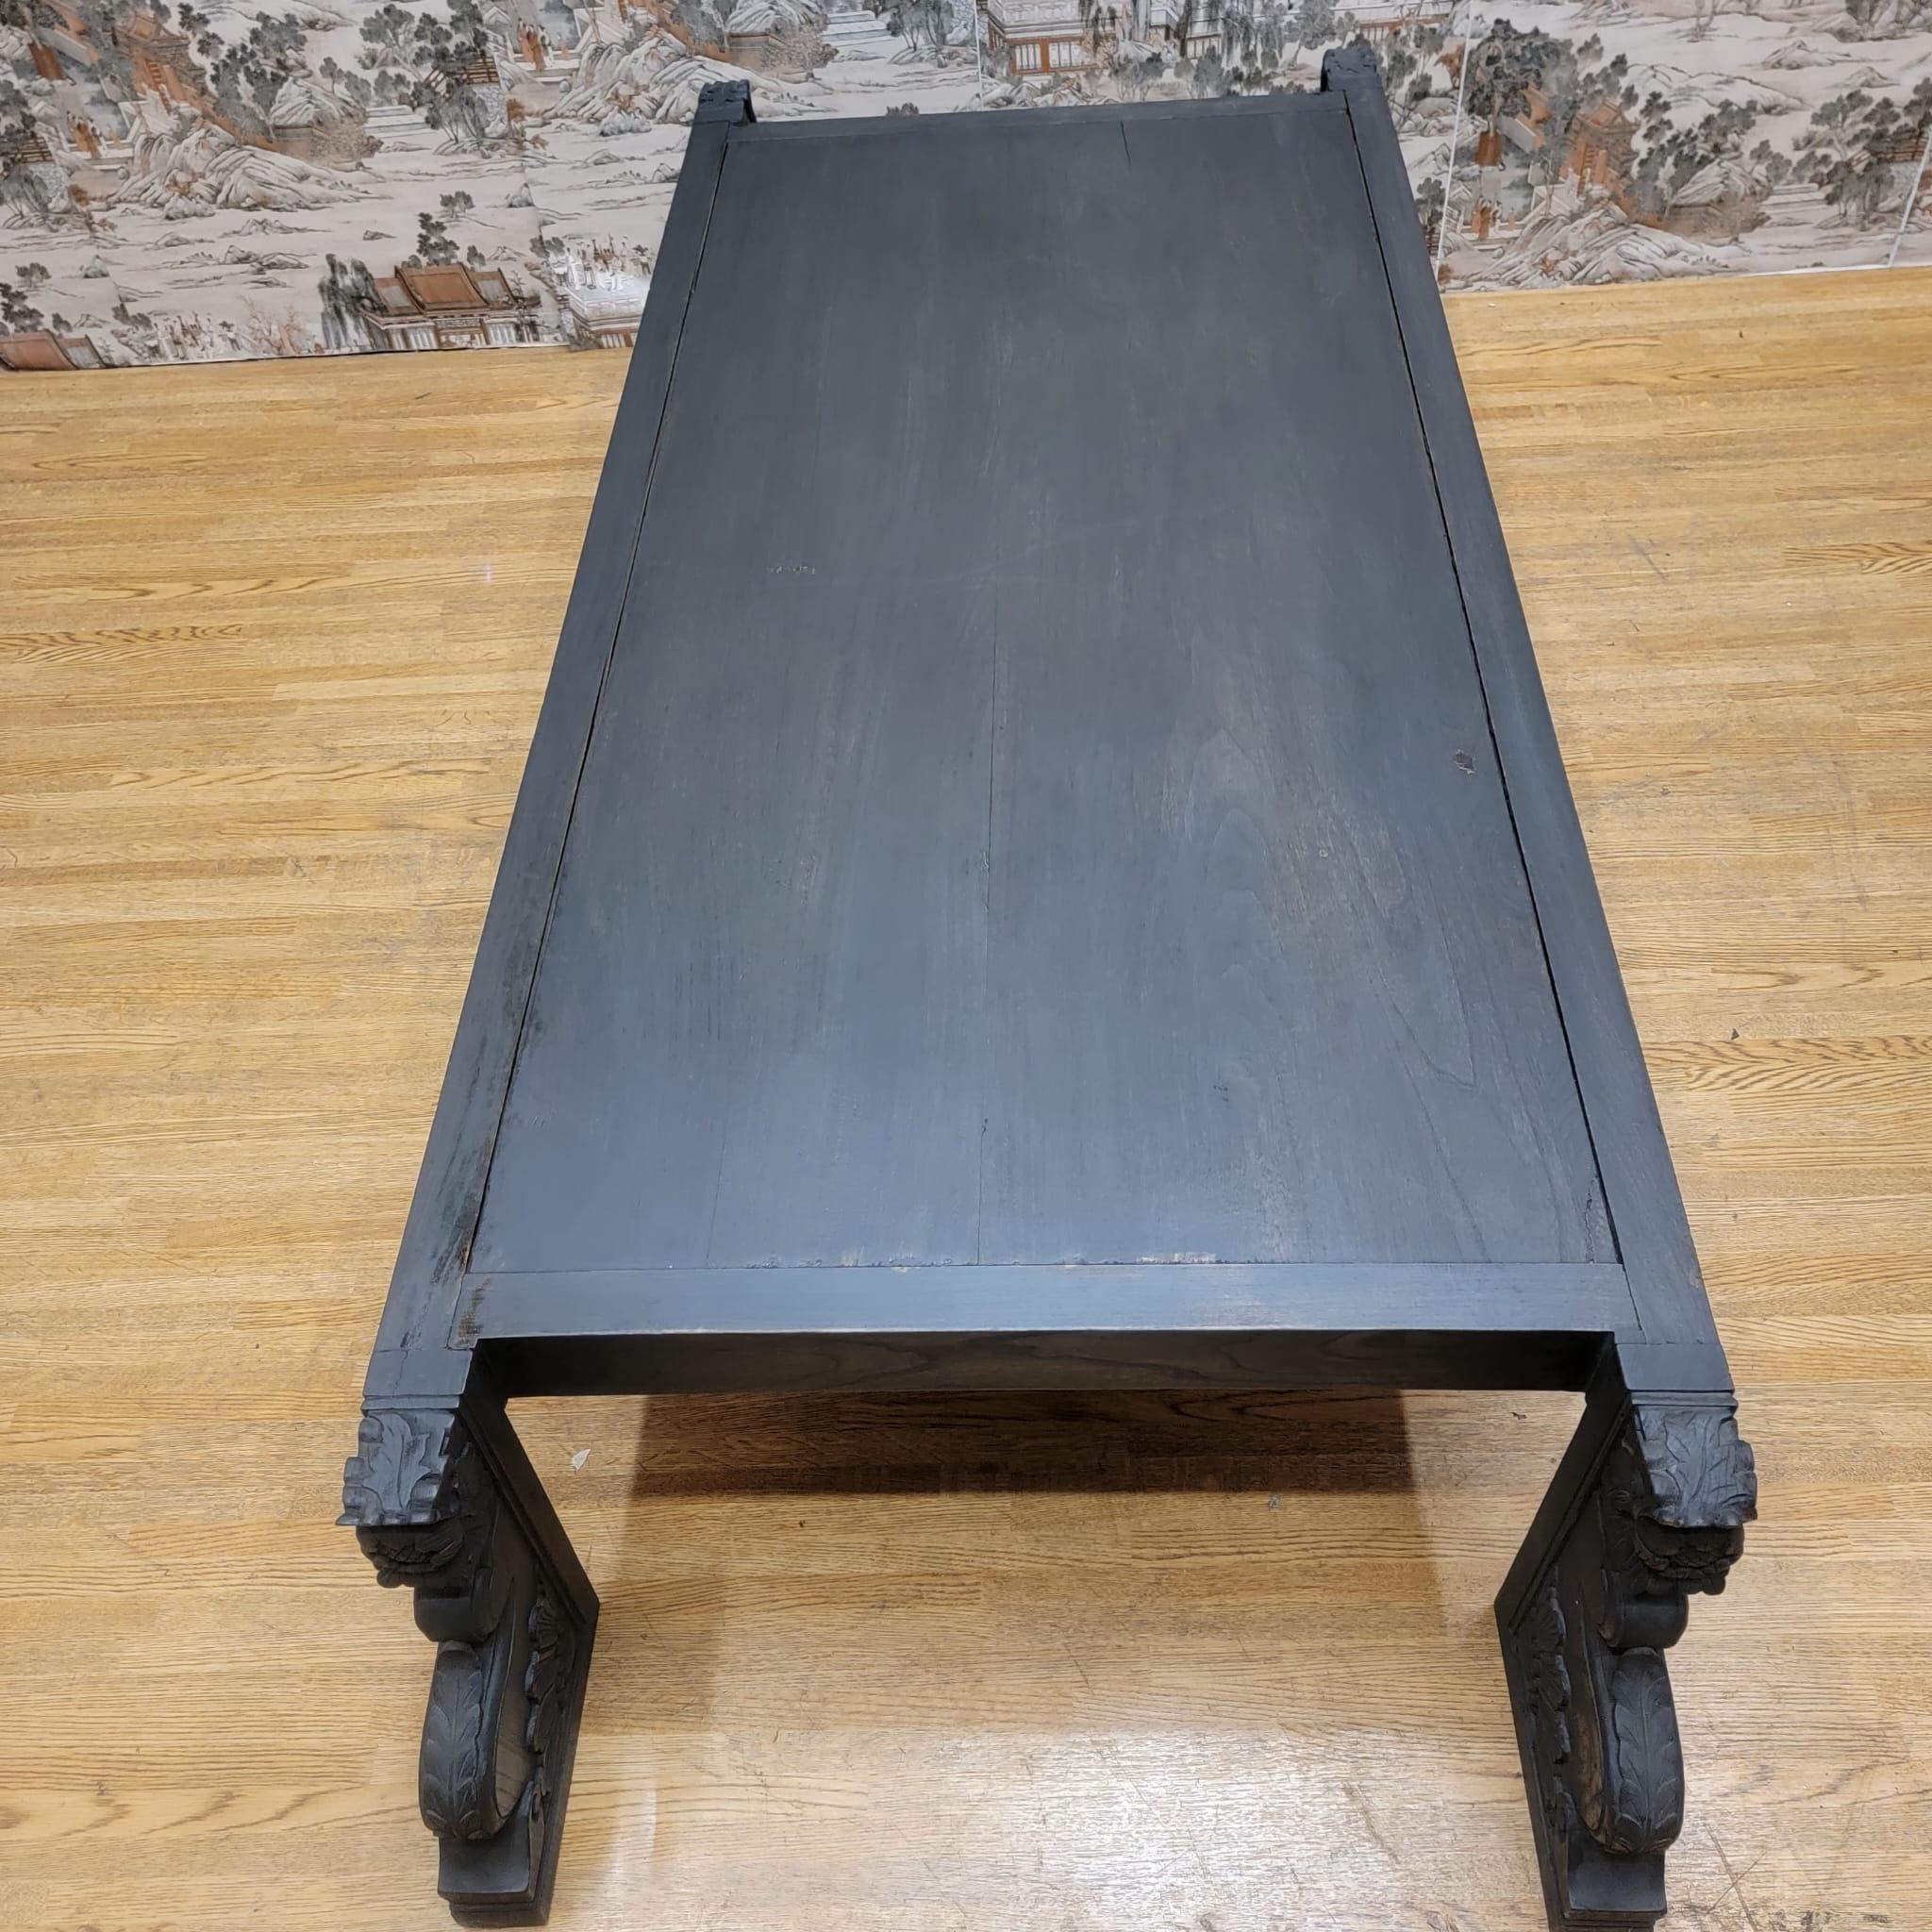 Vintage Chinese black elmwood coffee table with carved legs.

This vintage elm low coffee table has been lacquered with a unique slate / black color. The special color and patina are original.

Circa: 1999 

Dimensions:

W: 71